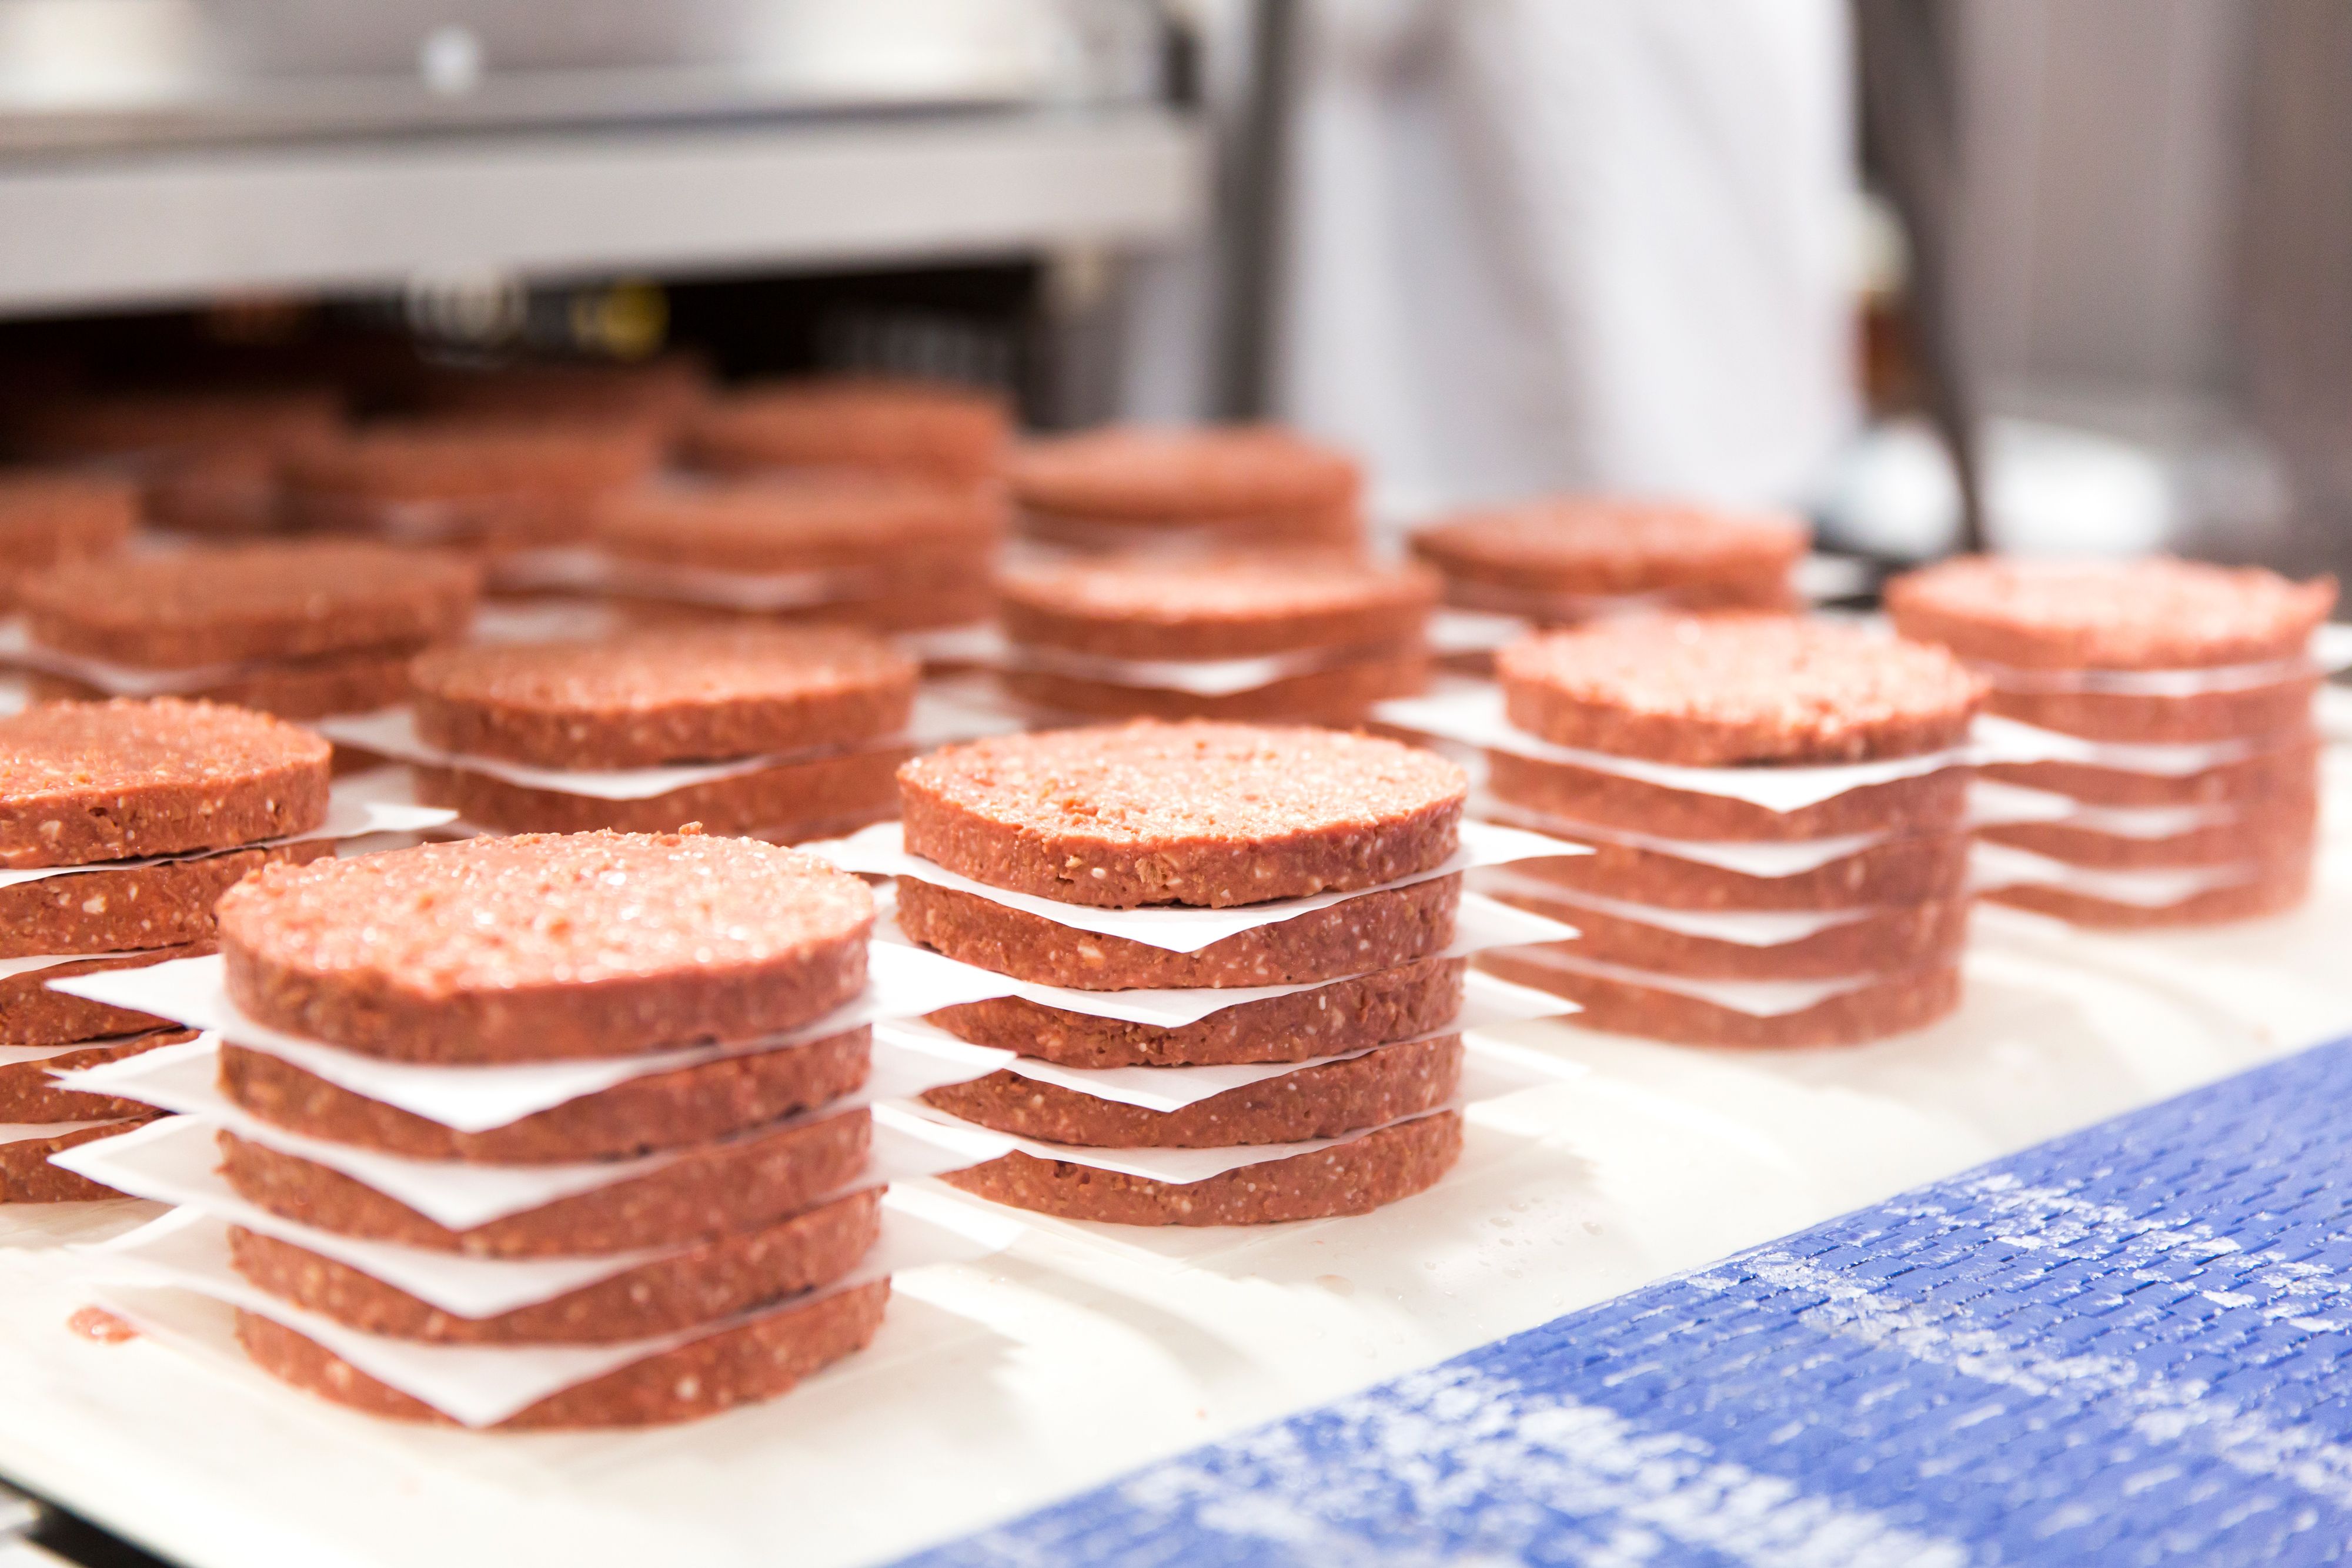 Beyond Meat rival Impossible Foods raises another $300 million